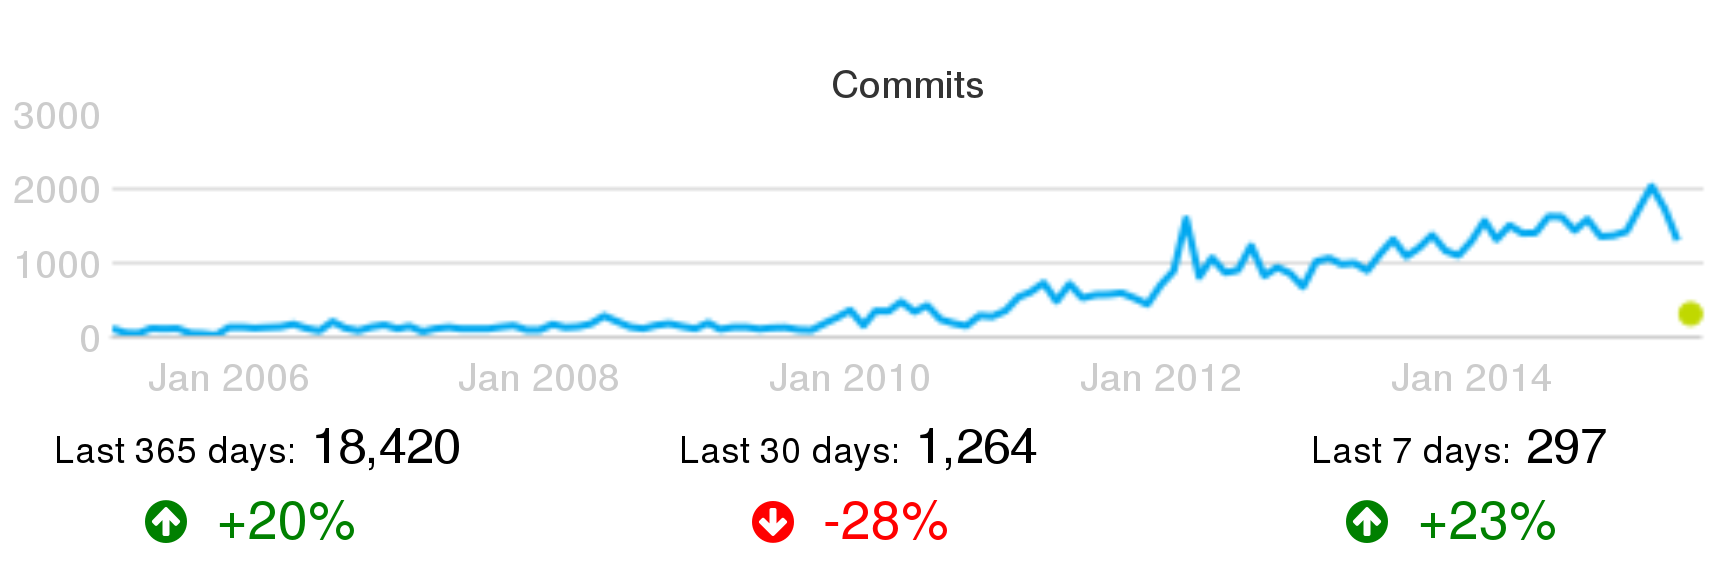 Activity in Puppet (commits per month) circa June 2015